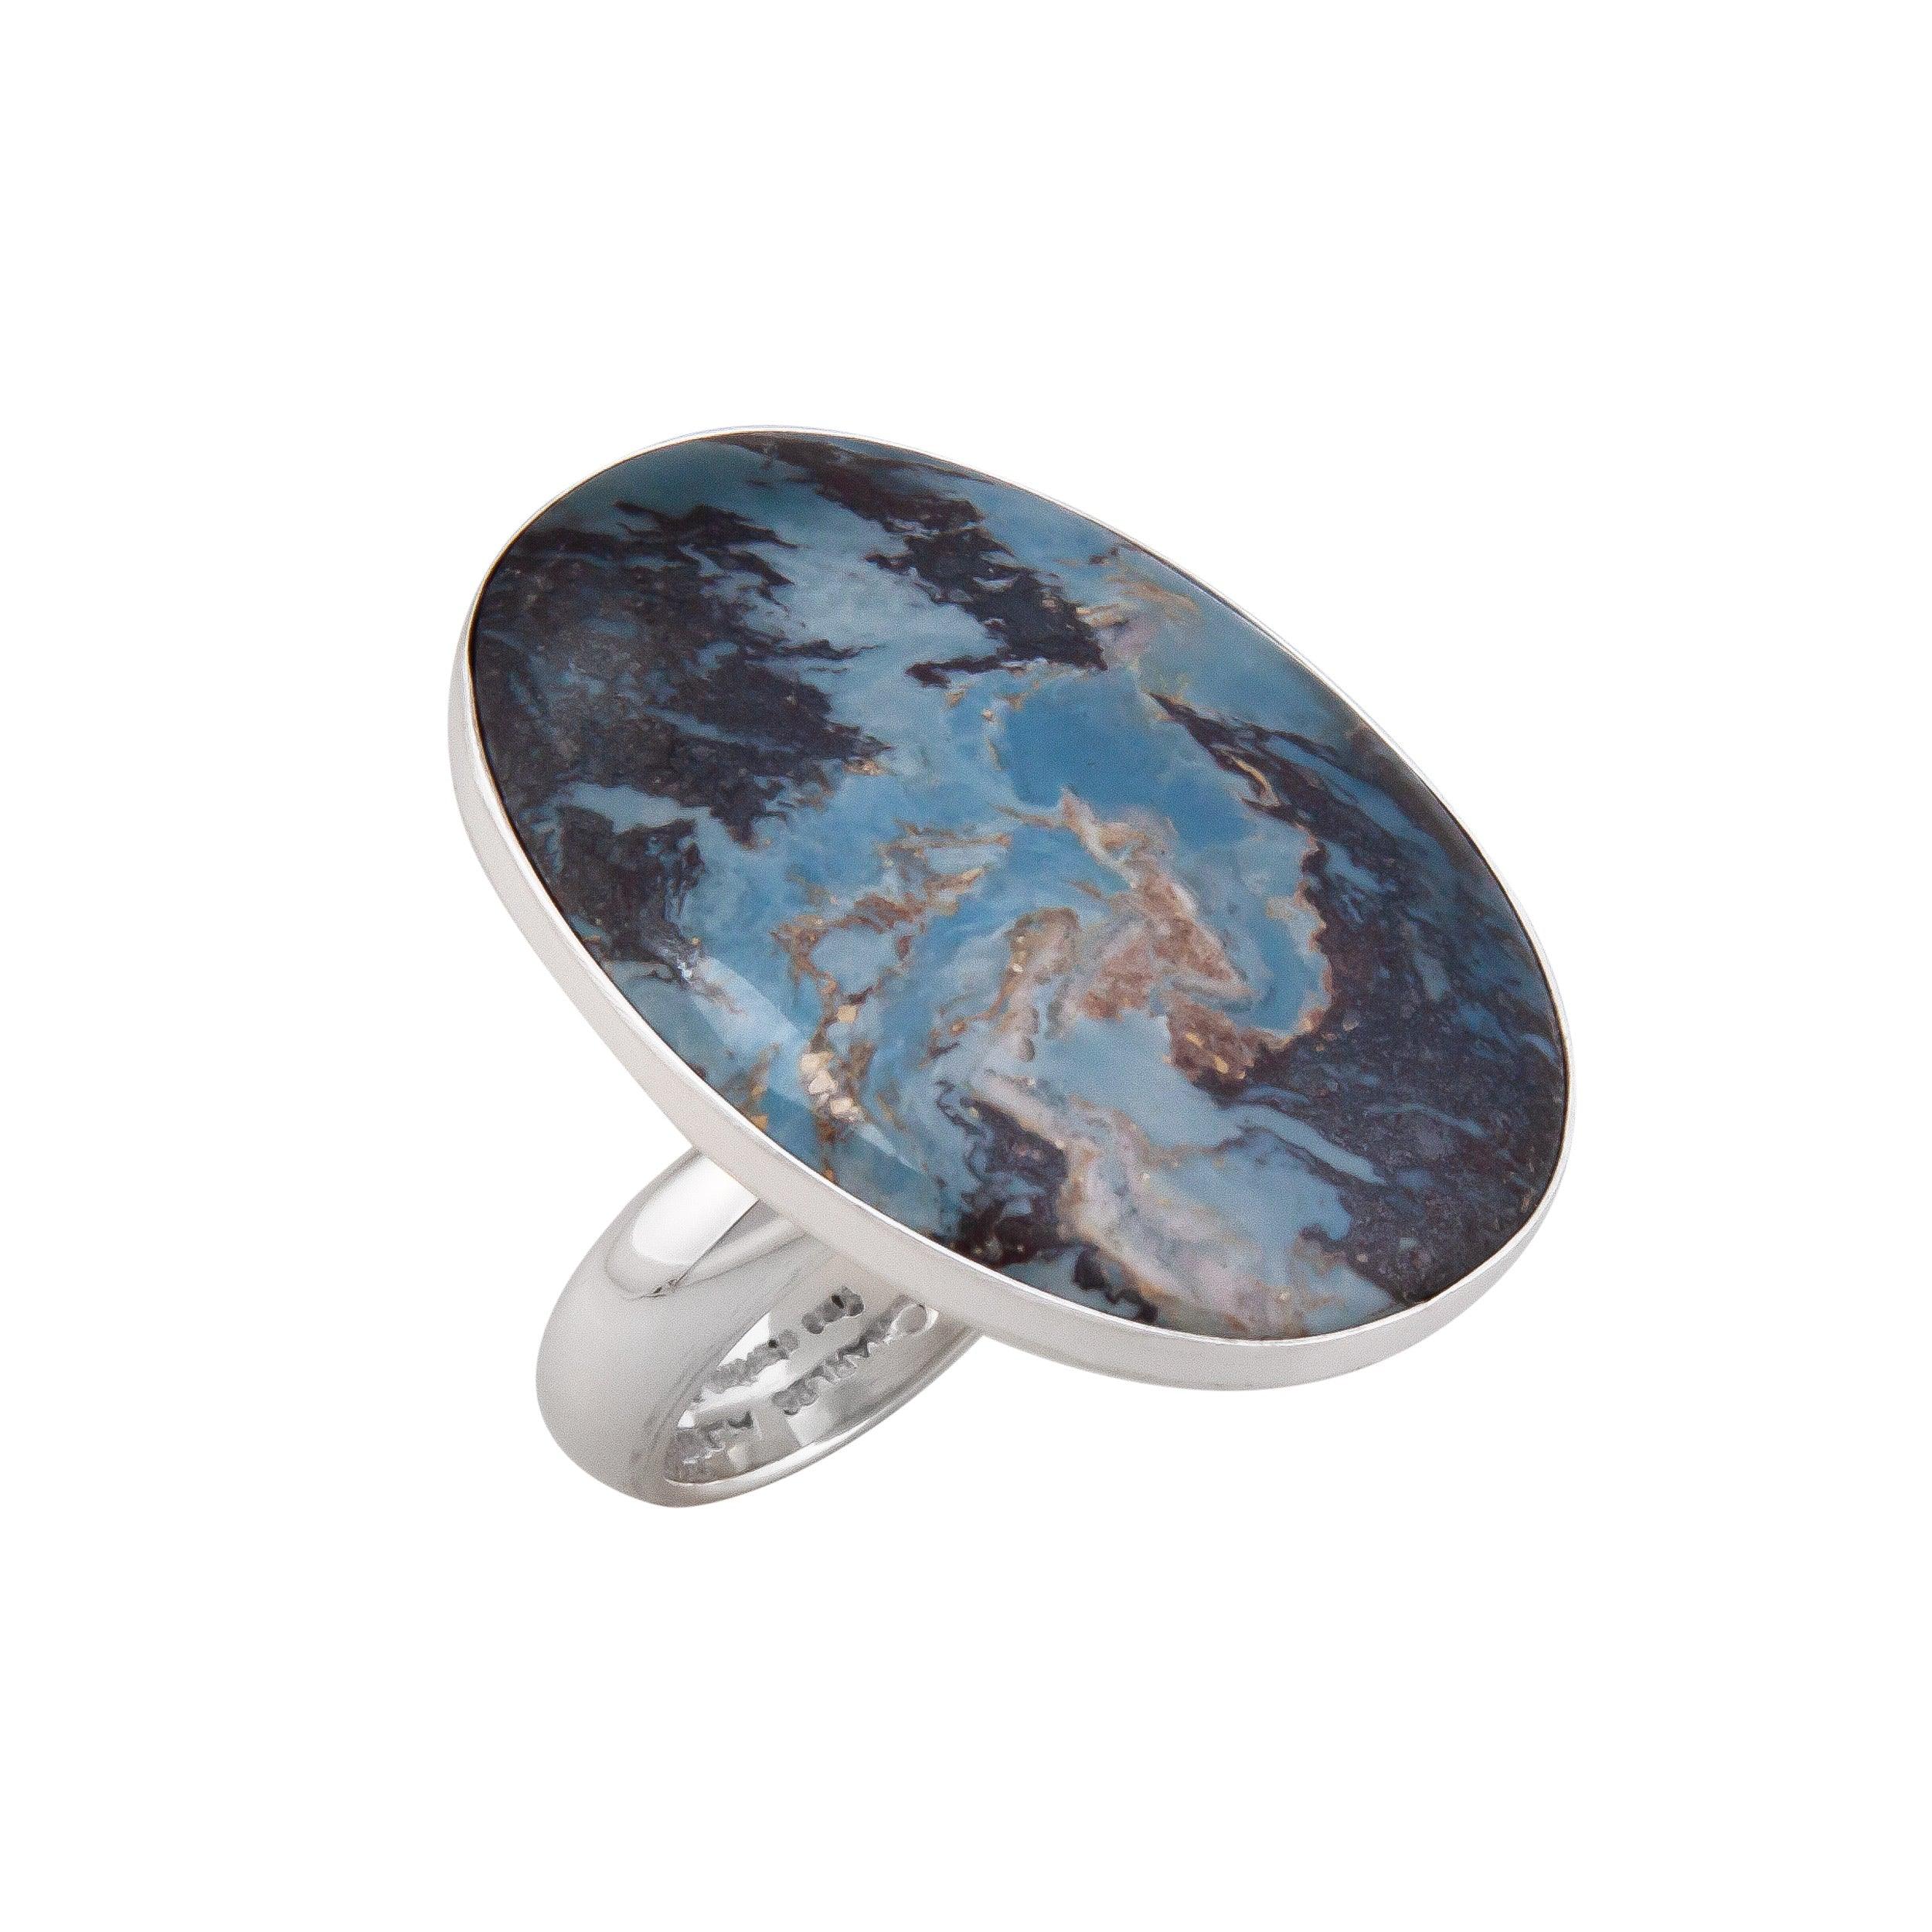 Aztec Lapis Sterling Silver Adjustable Ring